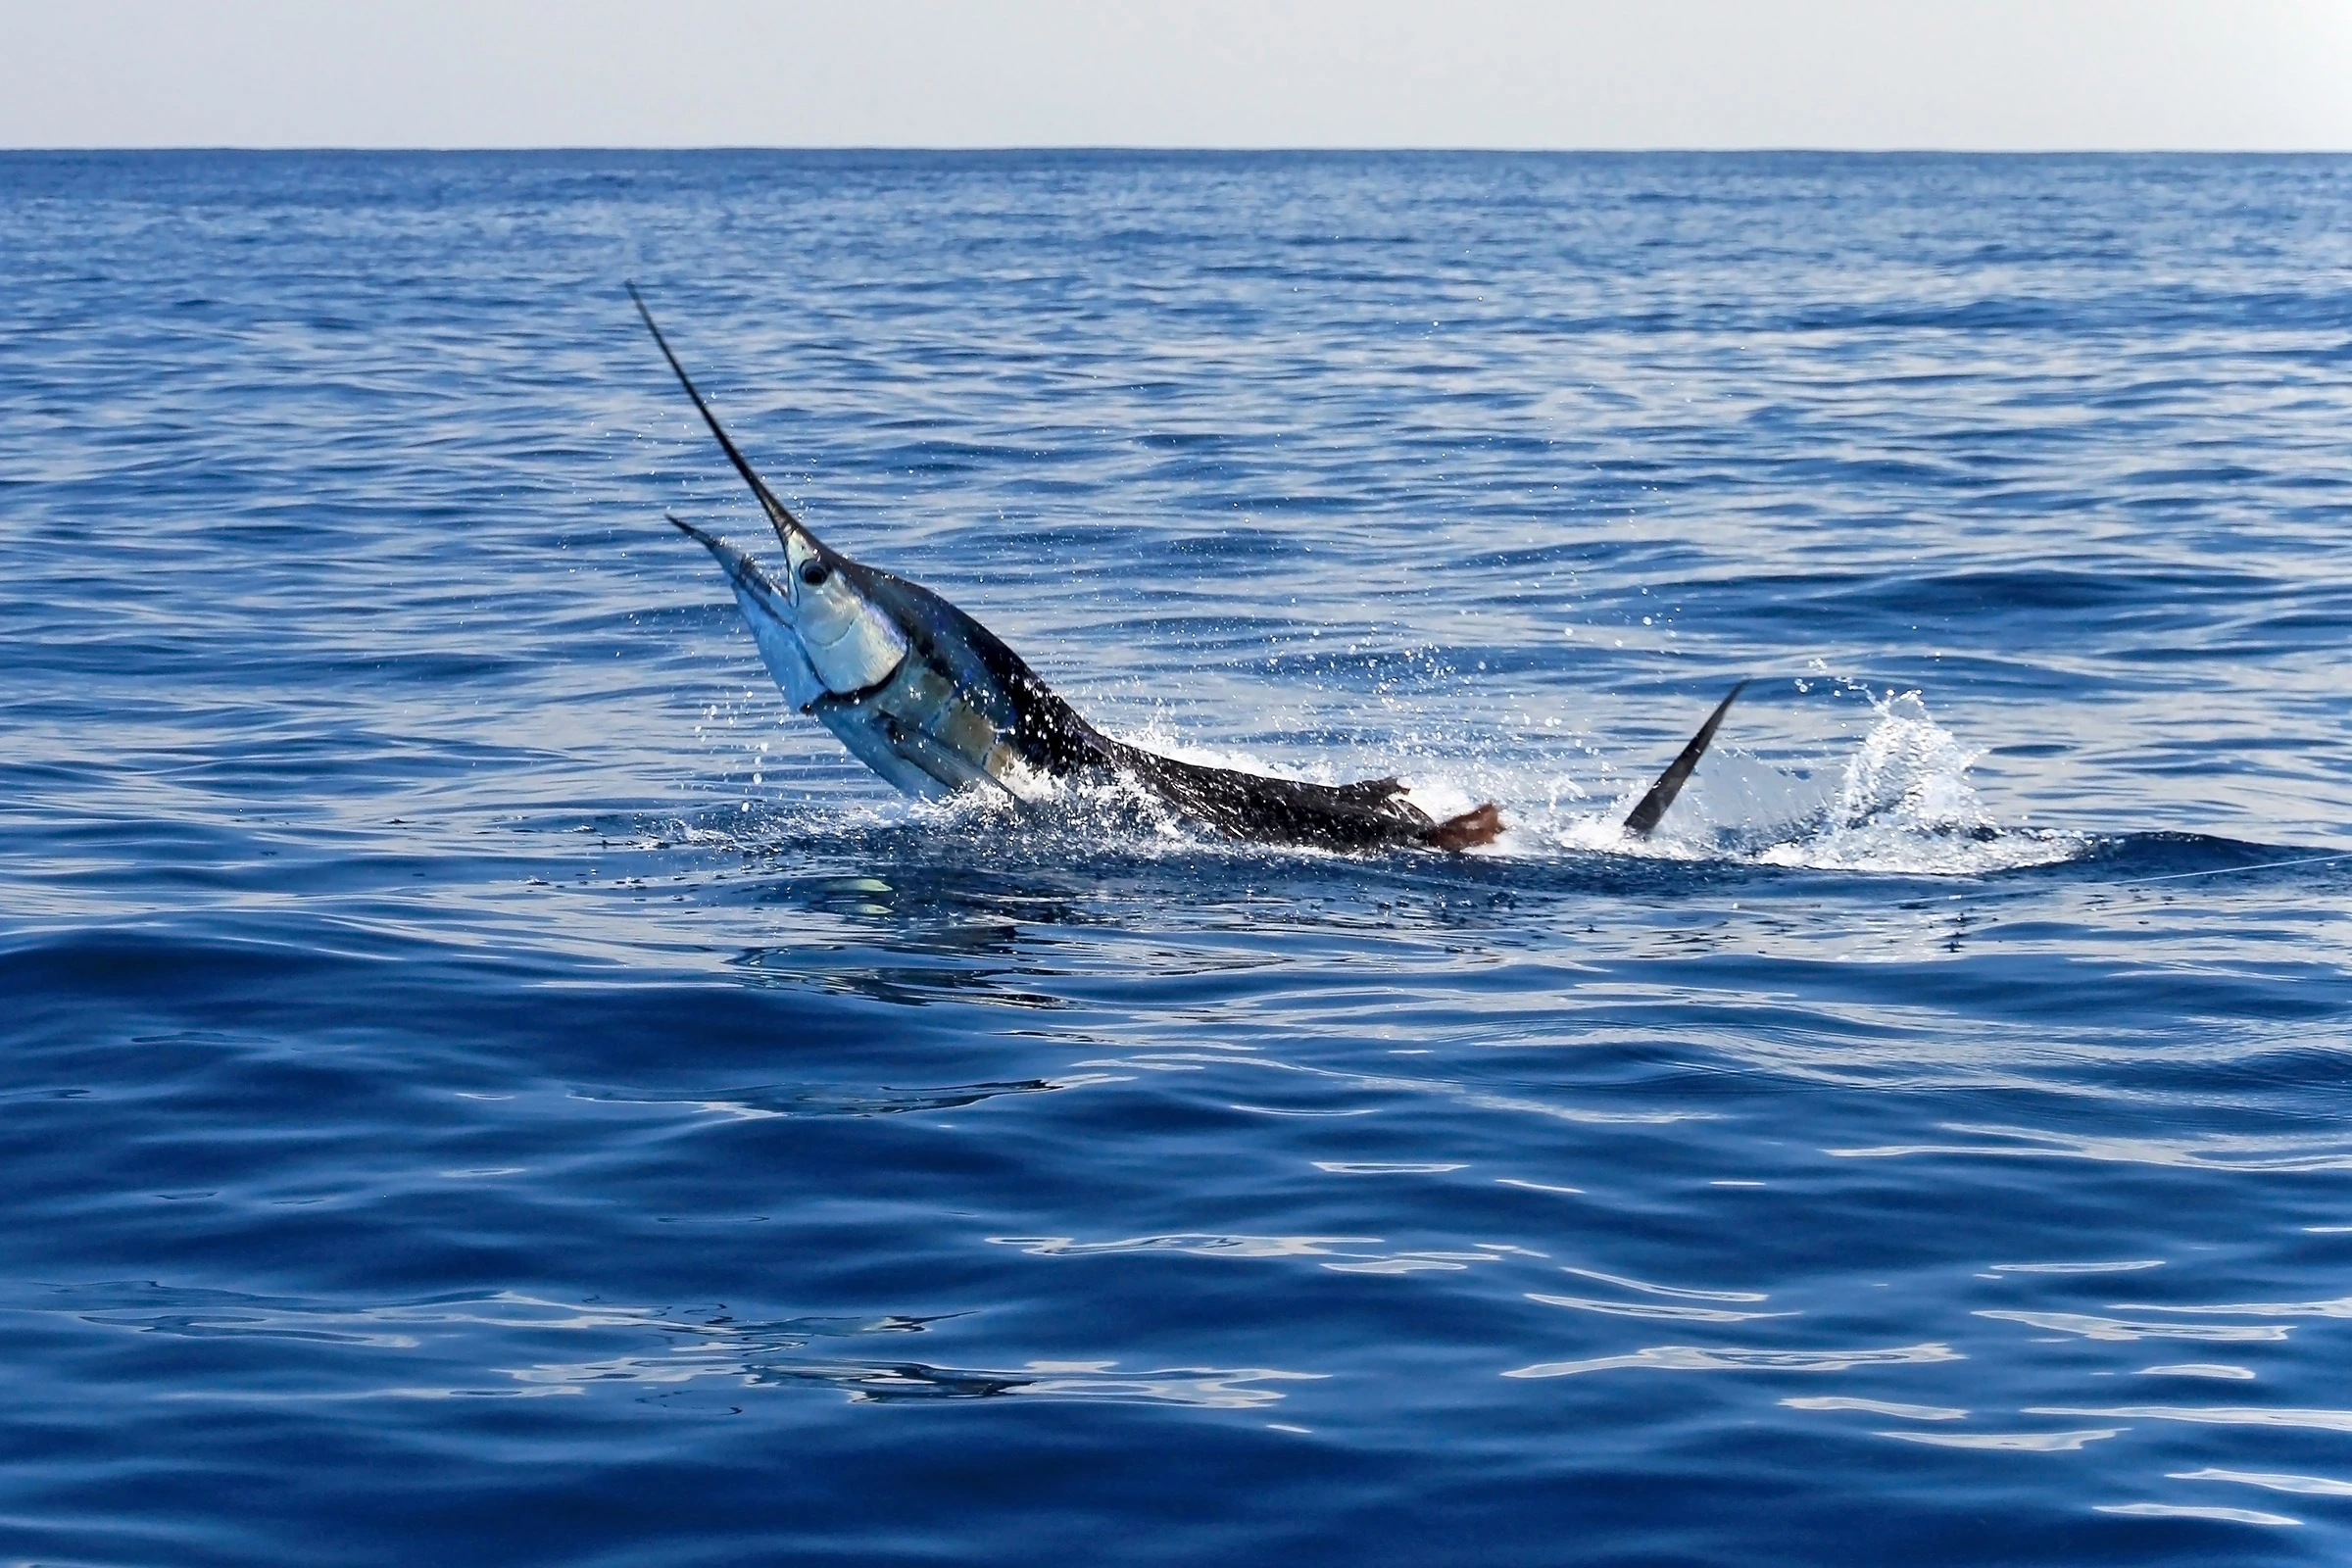 Sailfish a Favourite Target in the Maldives